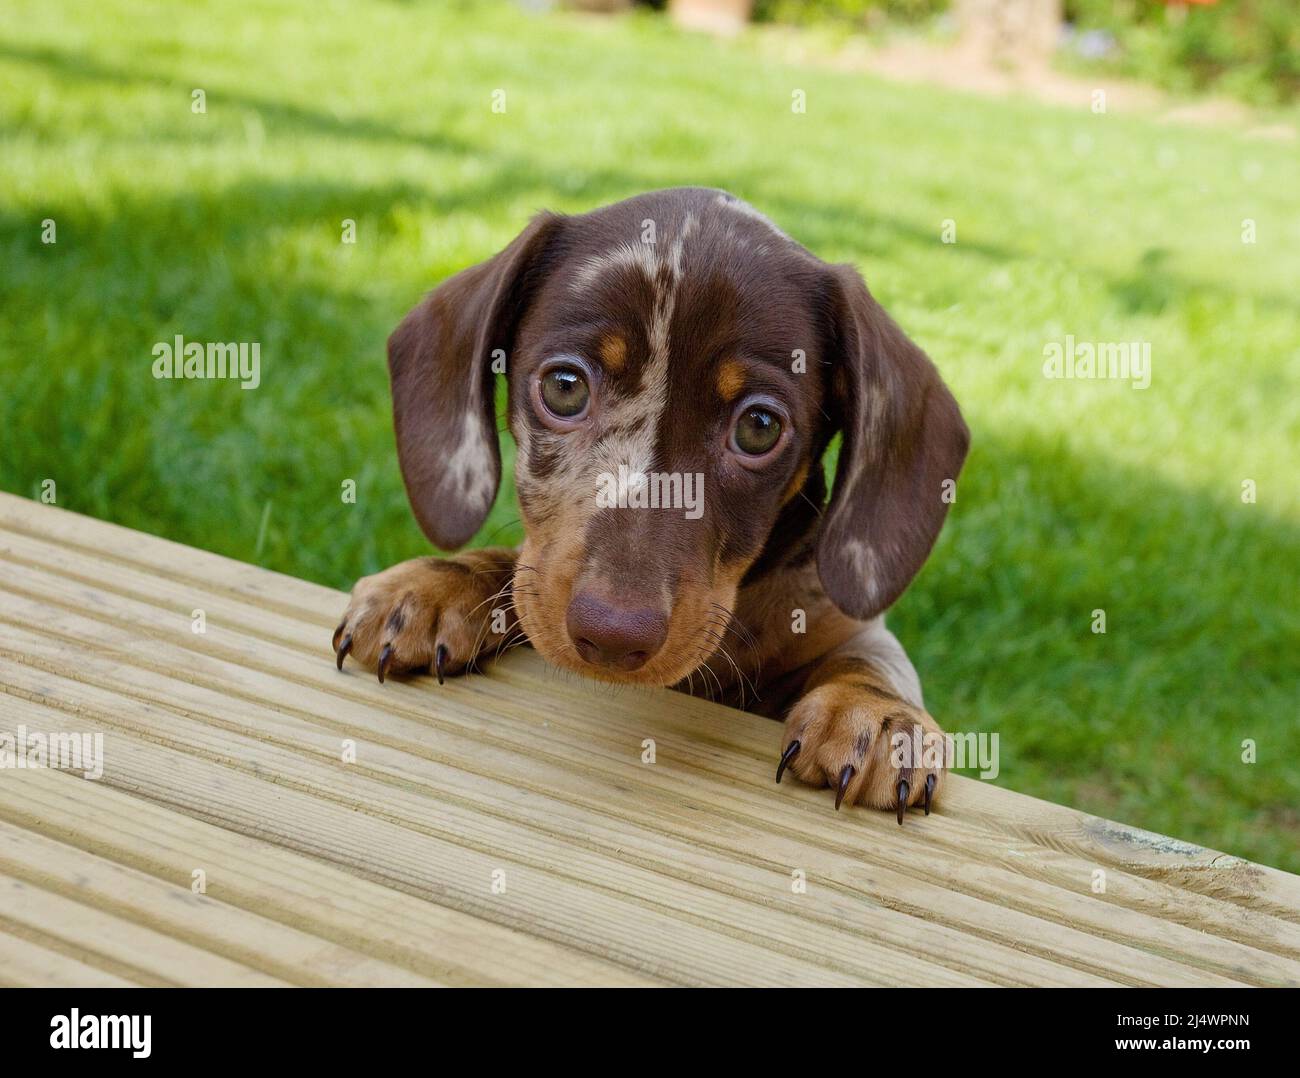 Dachshund puppy trying to climb onto decking Stock Photo